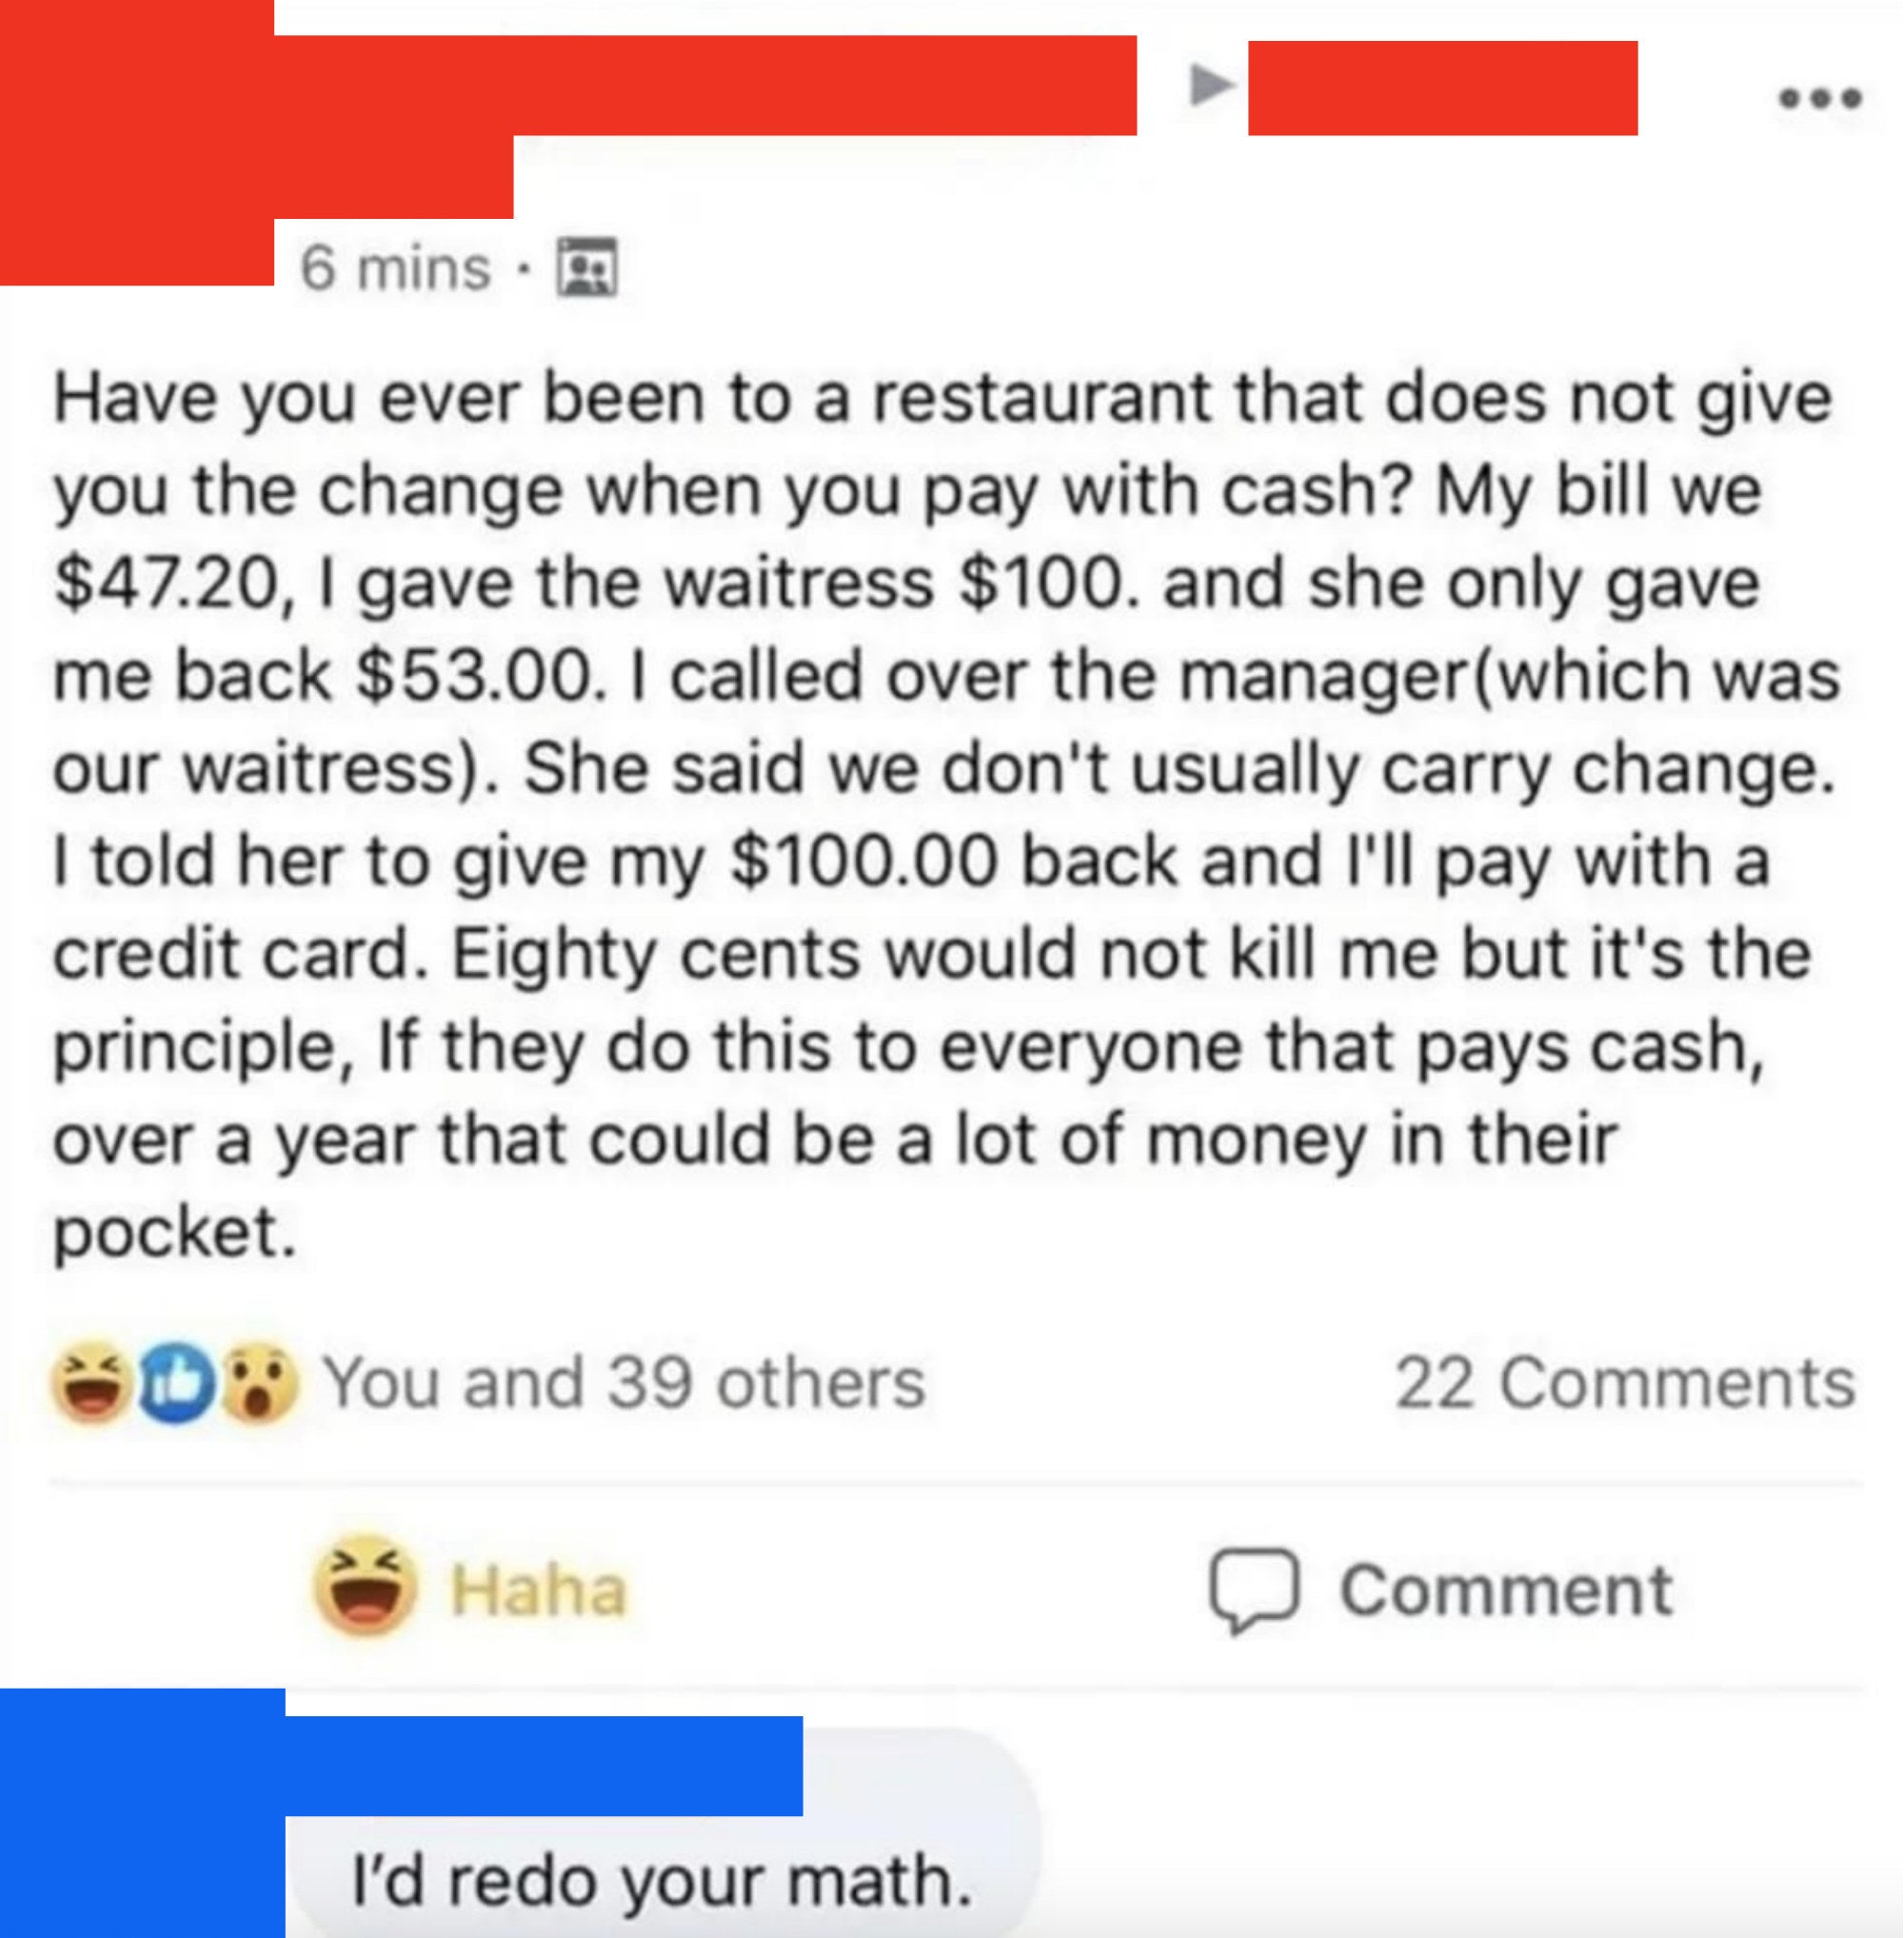 Person gives a waitress $100 for a $47.30 order and gets only $53 back, and when they&#x27;re told the waitstaff doesn&#x27;t usually carry change, they say give them their money back and they&#x27;ll pay with a credit card, w/response: &quot;I&#x27;d redo your math&quot;